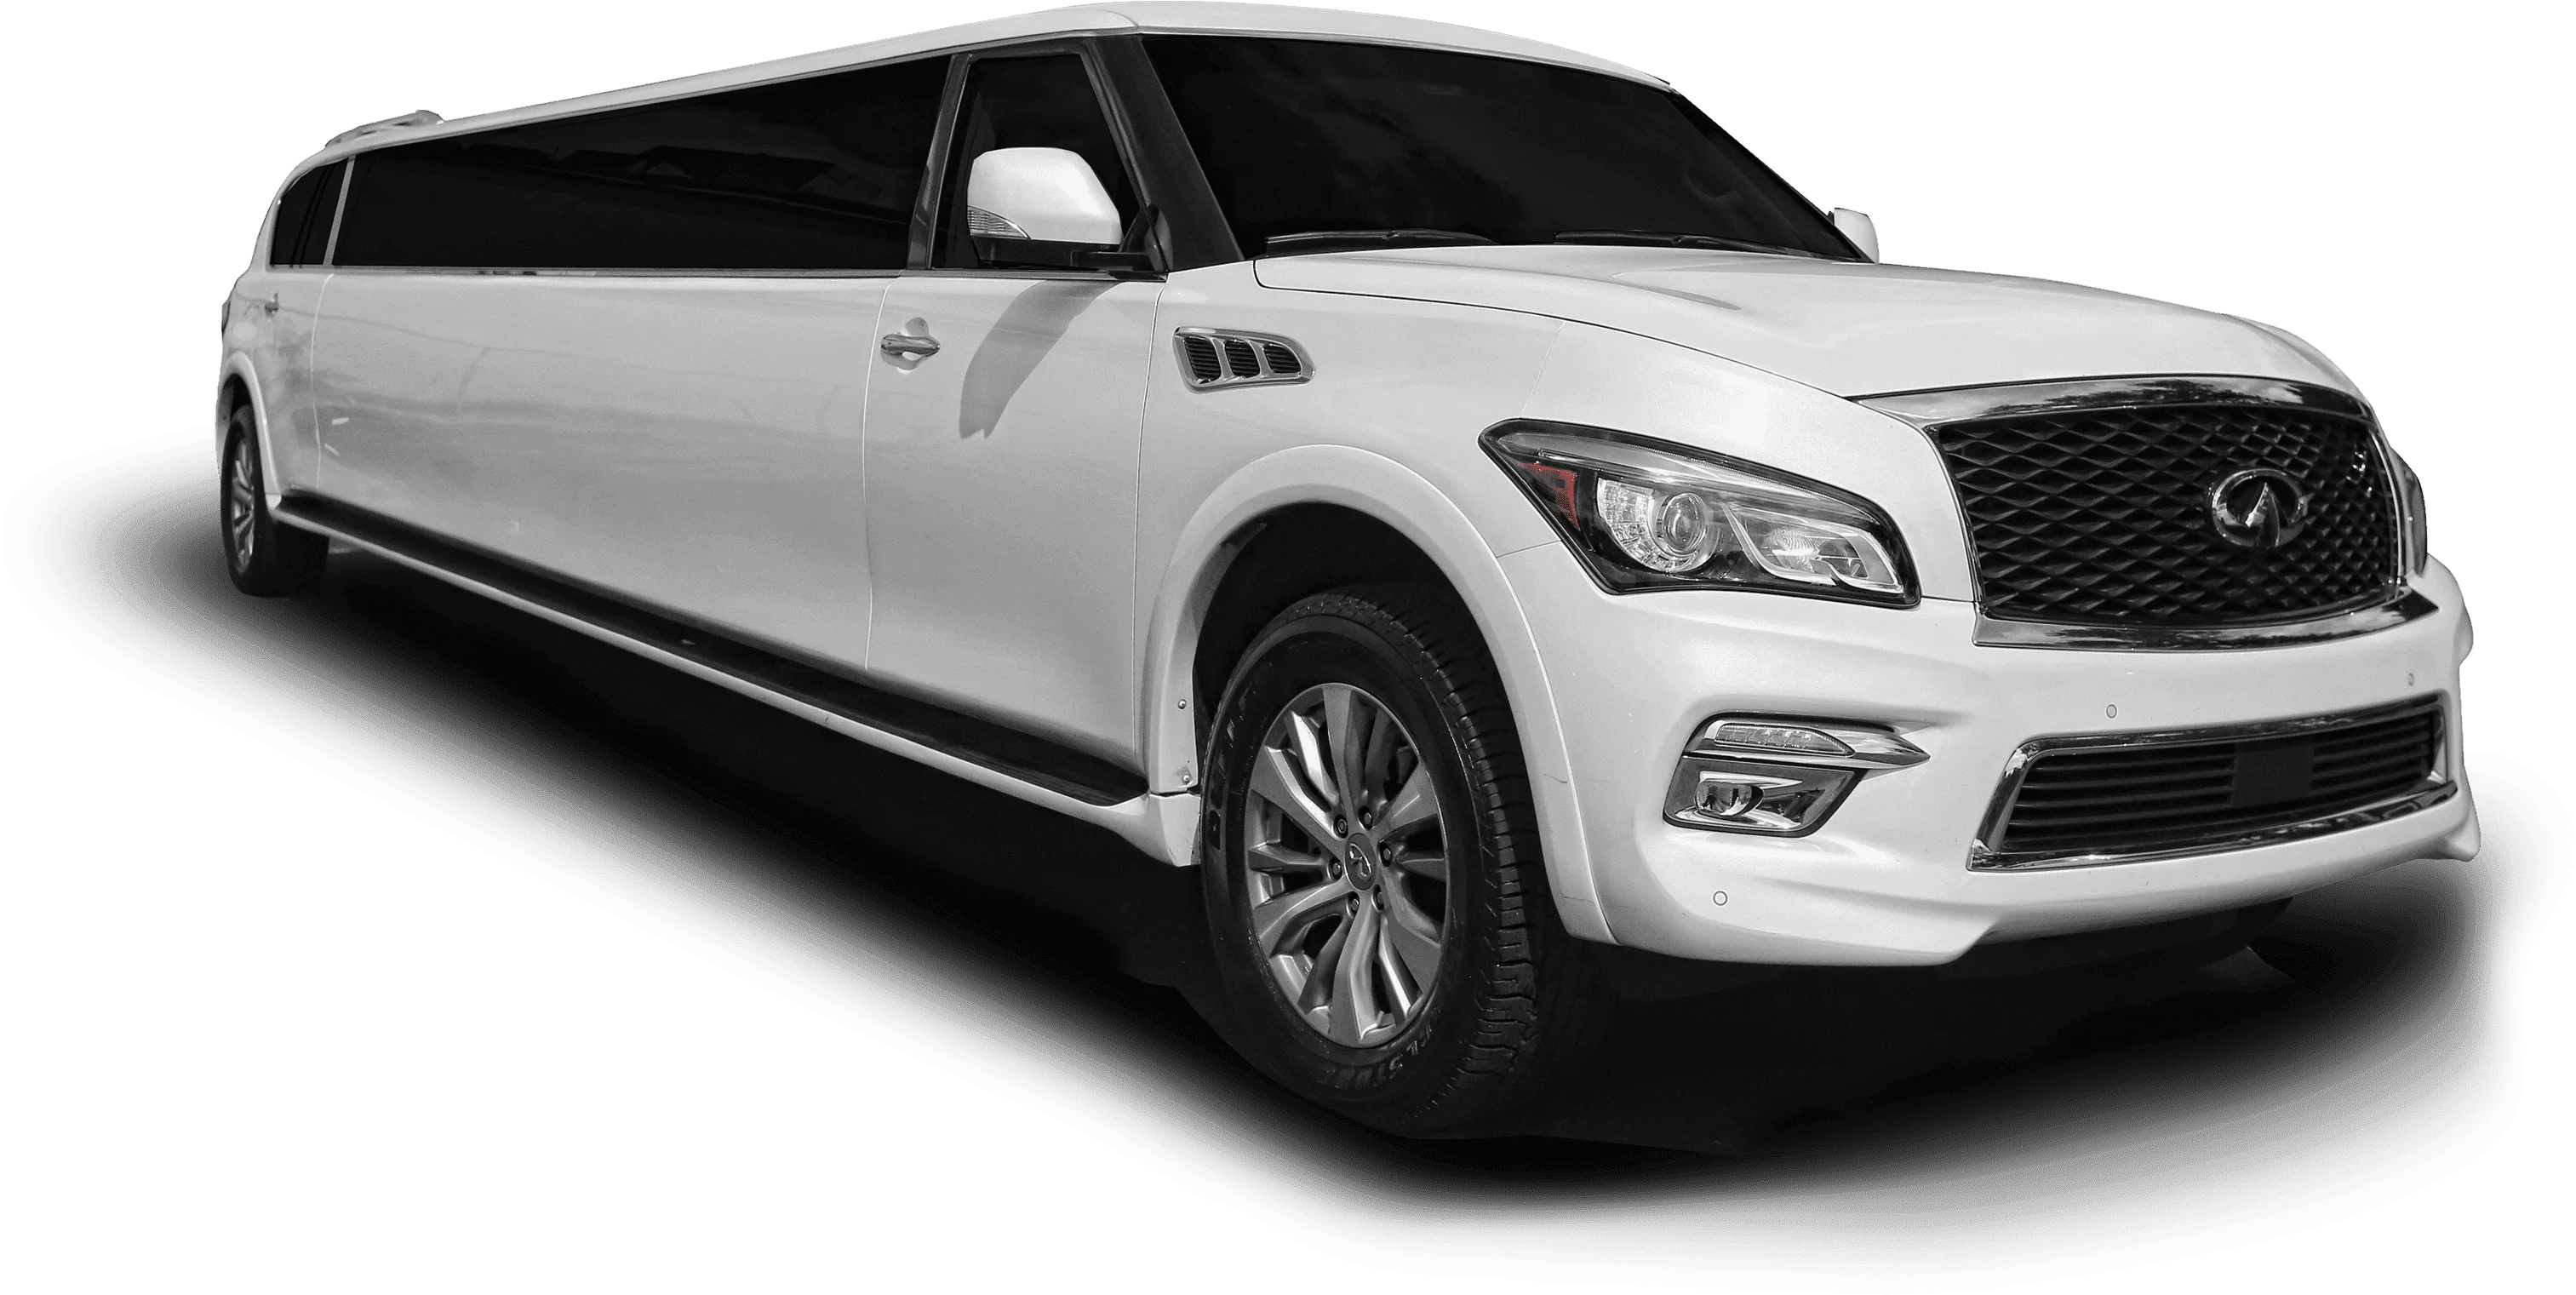 Airport limo service in London, Ontario